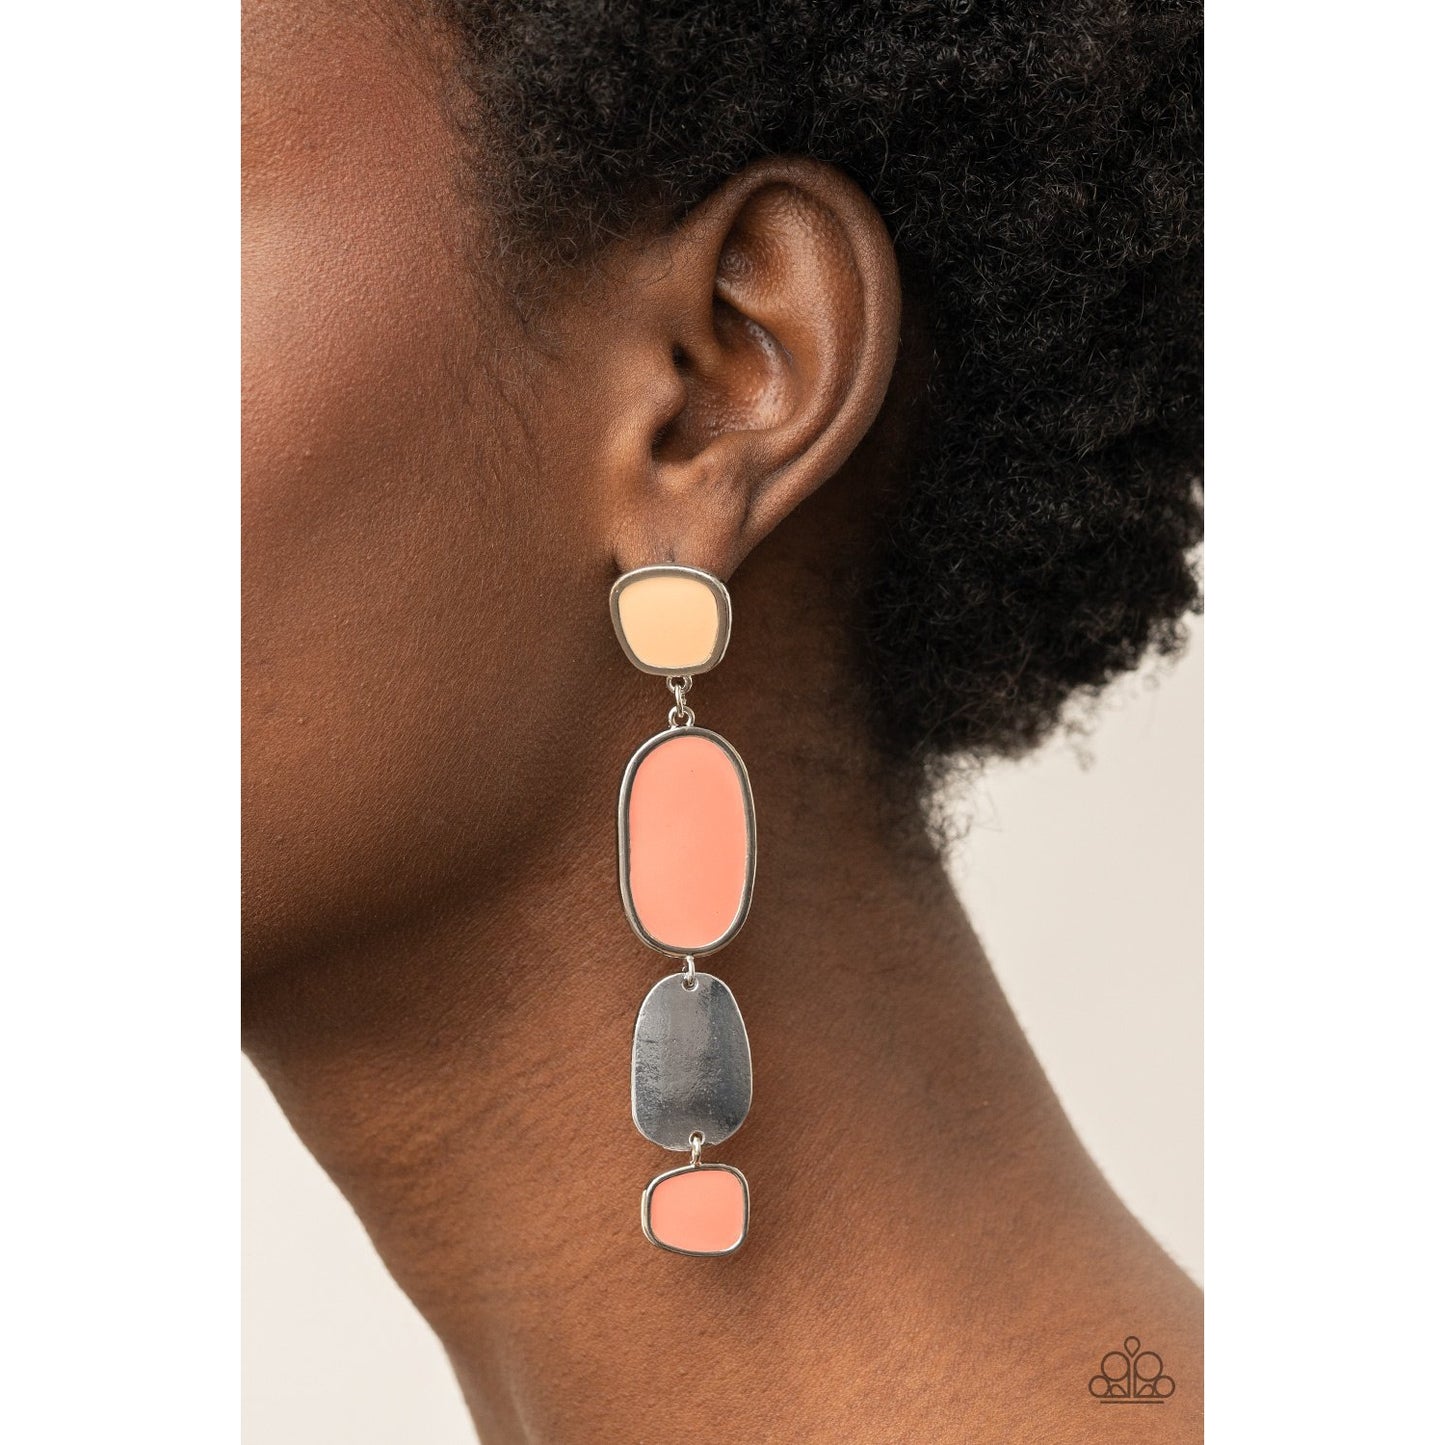 All Out Allure - Orange Earrings - Paparazzi Accessories - GlaMarous Titi Jewels